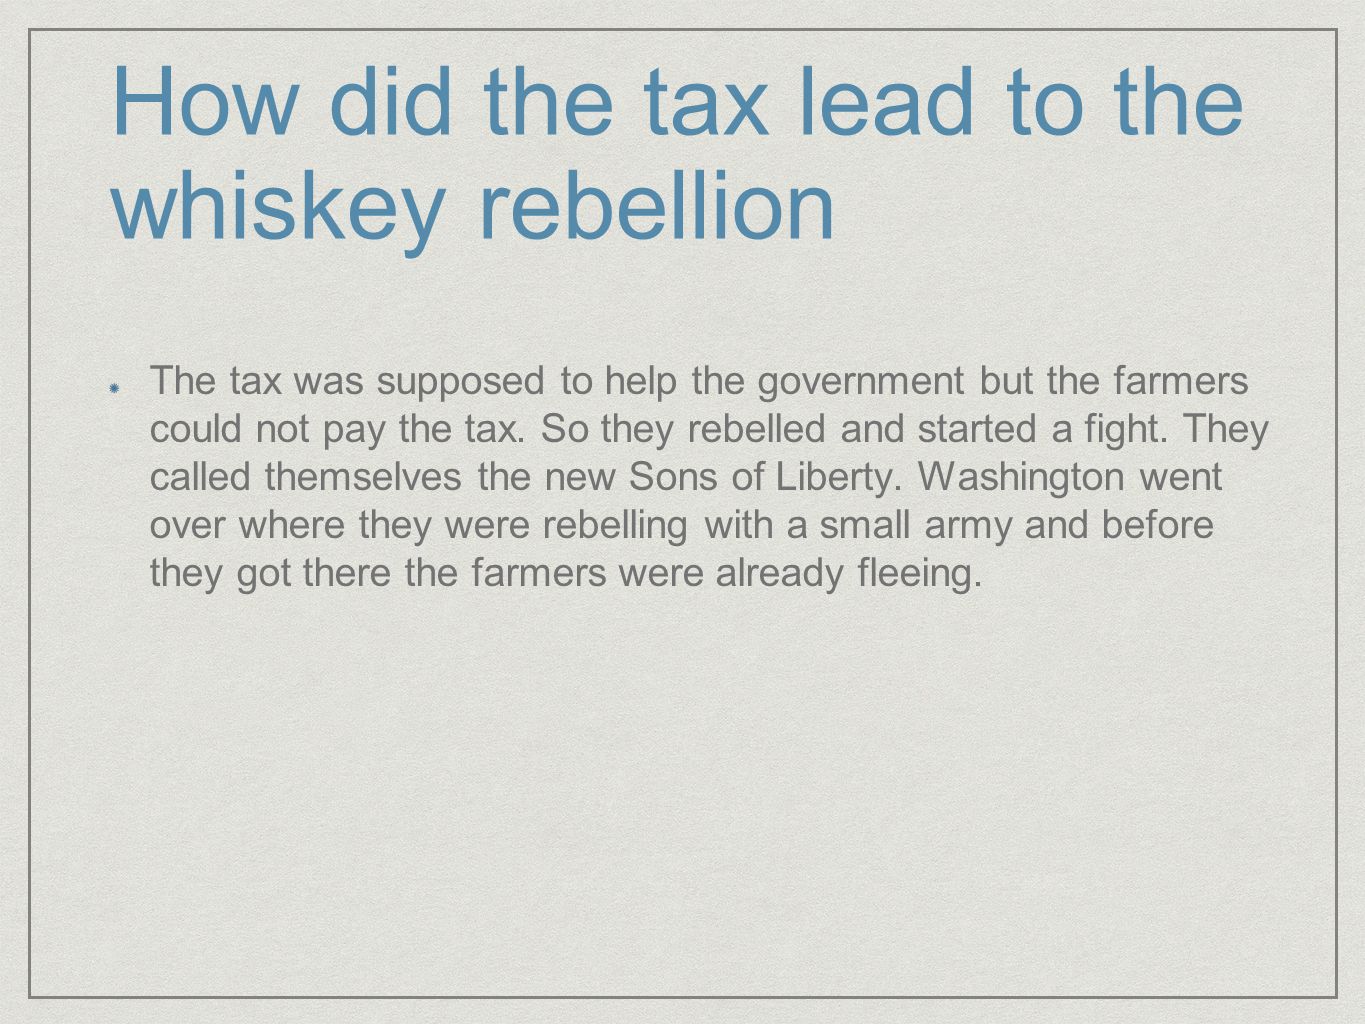 How did the tax lead to the whiskey rebellion The tax was supposed to help the government but the farmers could not pay the tax.